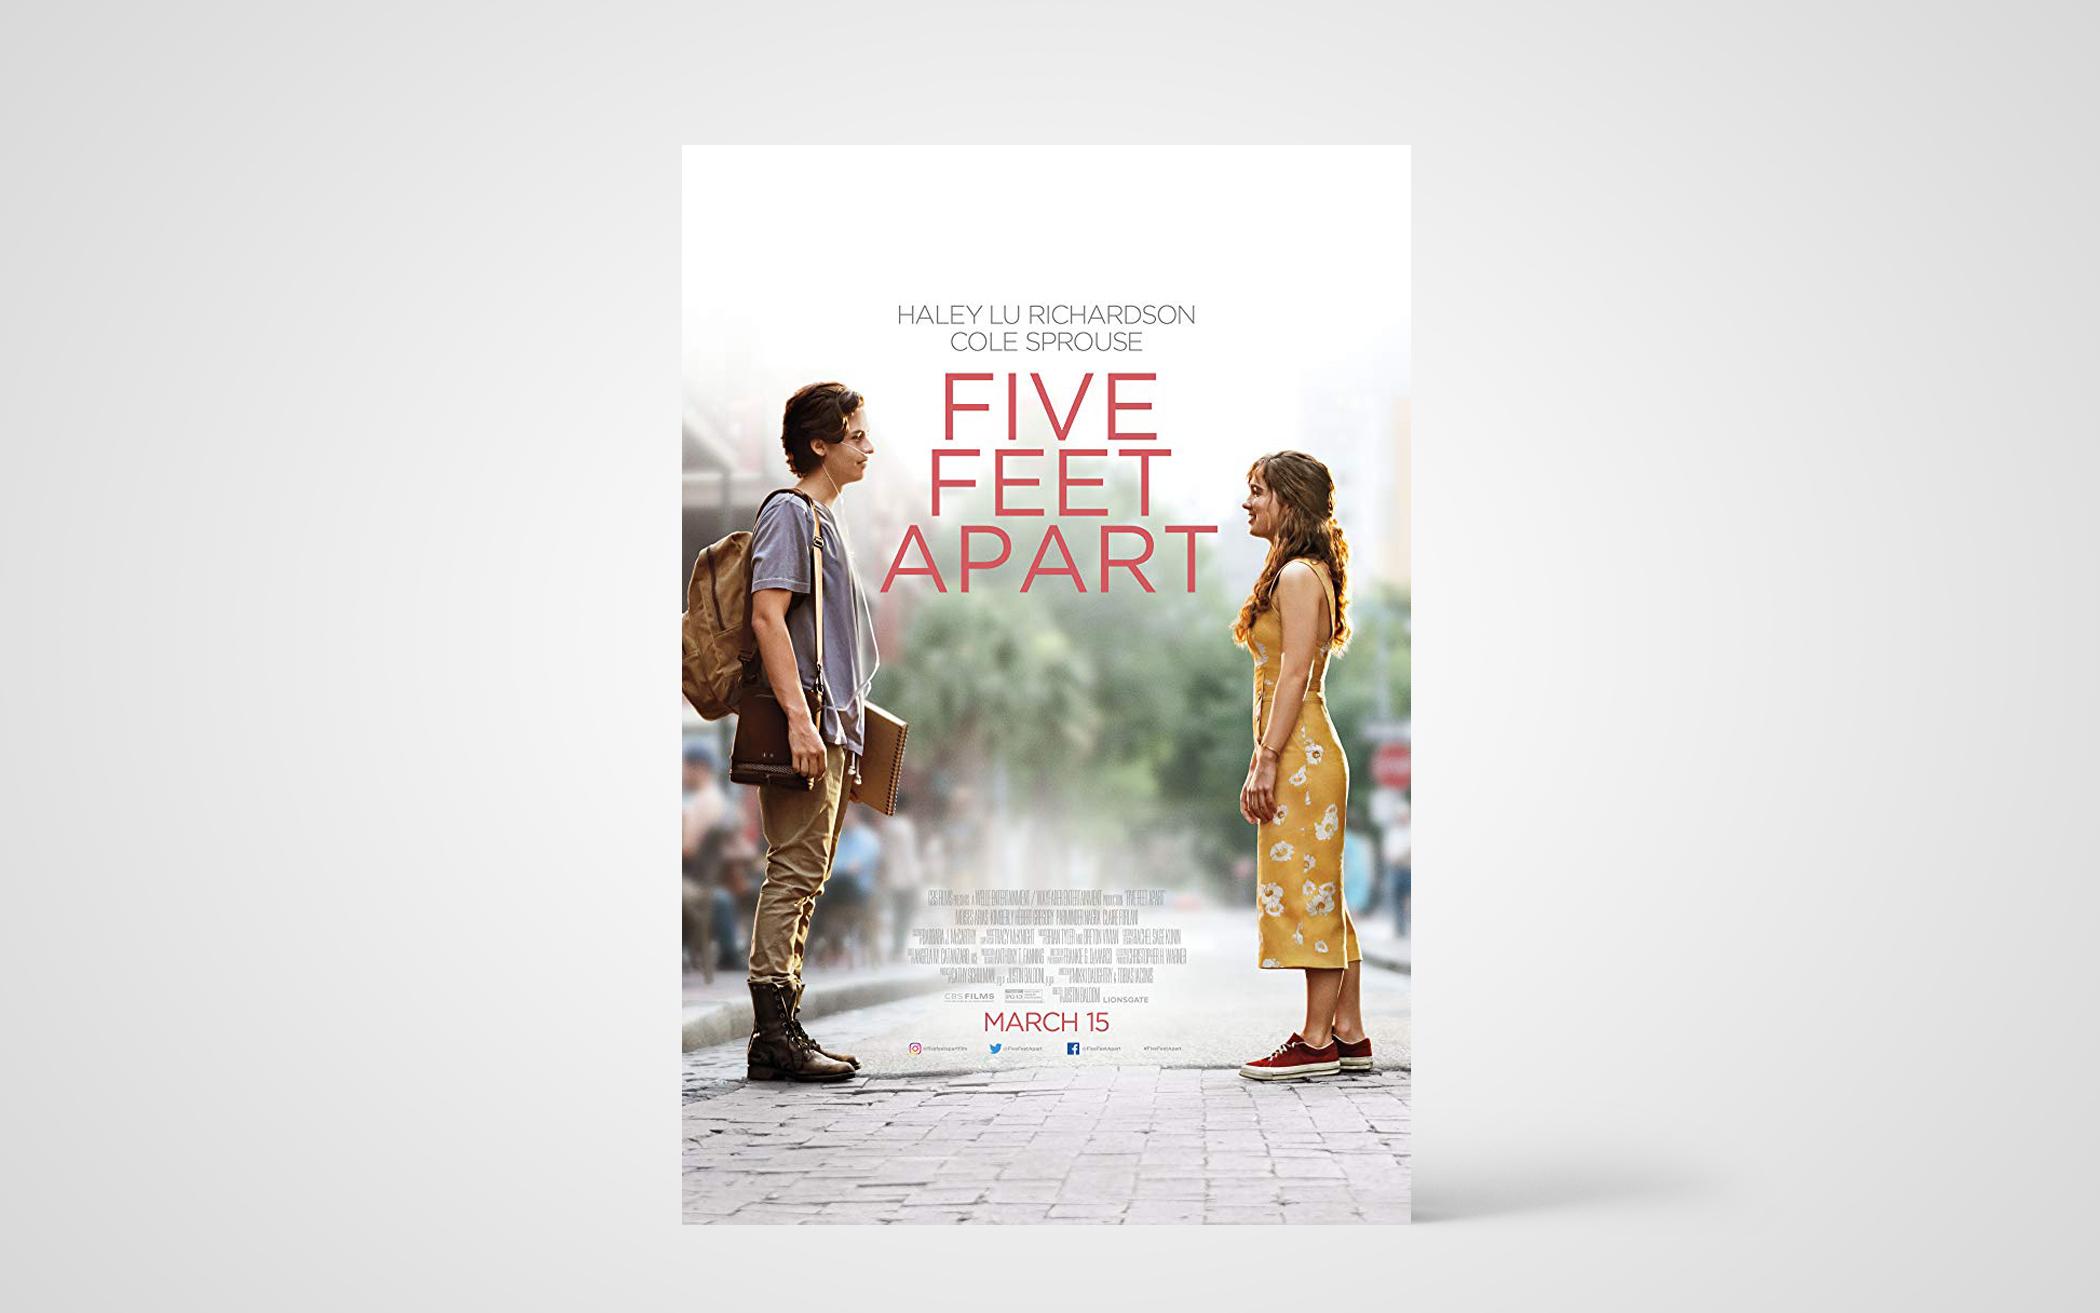 The Five Feet Apart Trailer Featuring Cole Sprouse and Haley Lu